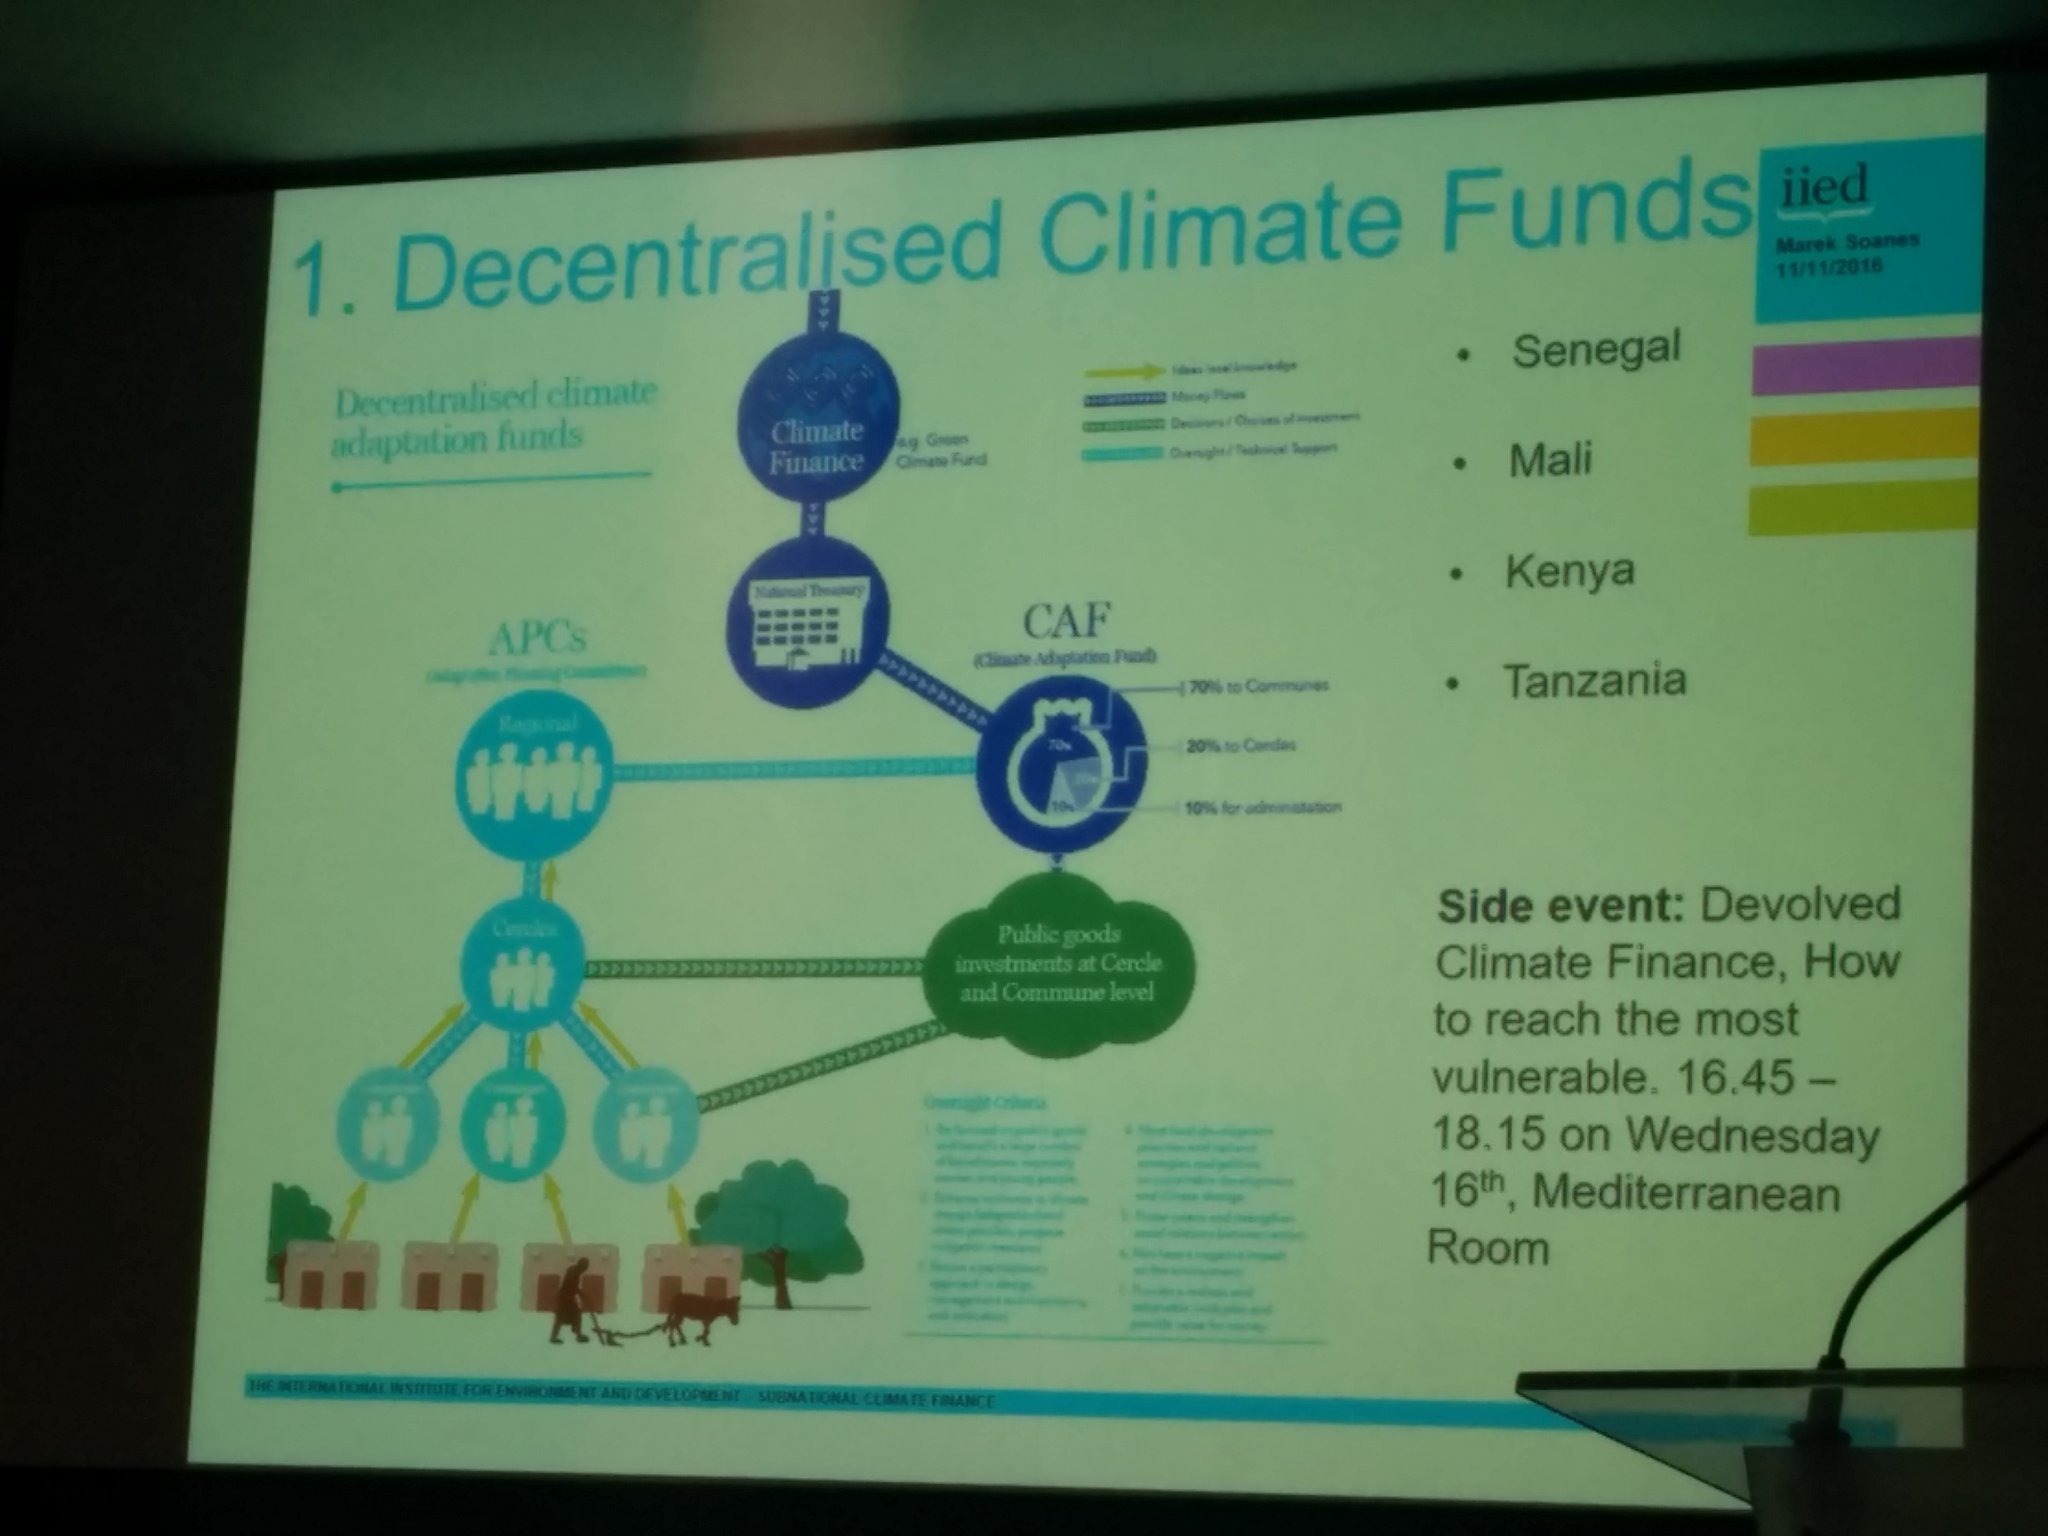 IIED is helping to develop decentralised financing architectures in developing countries #COP22 https://t.co/tBYCCeXMhv